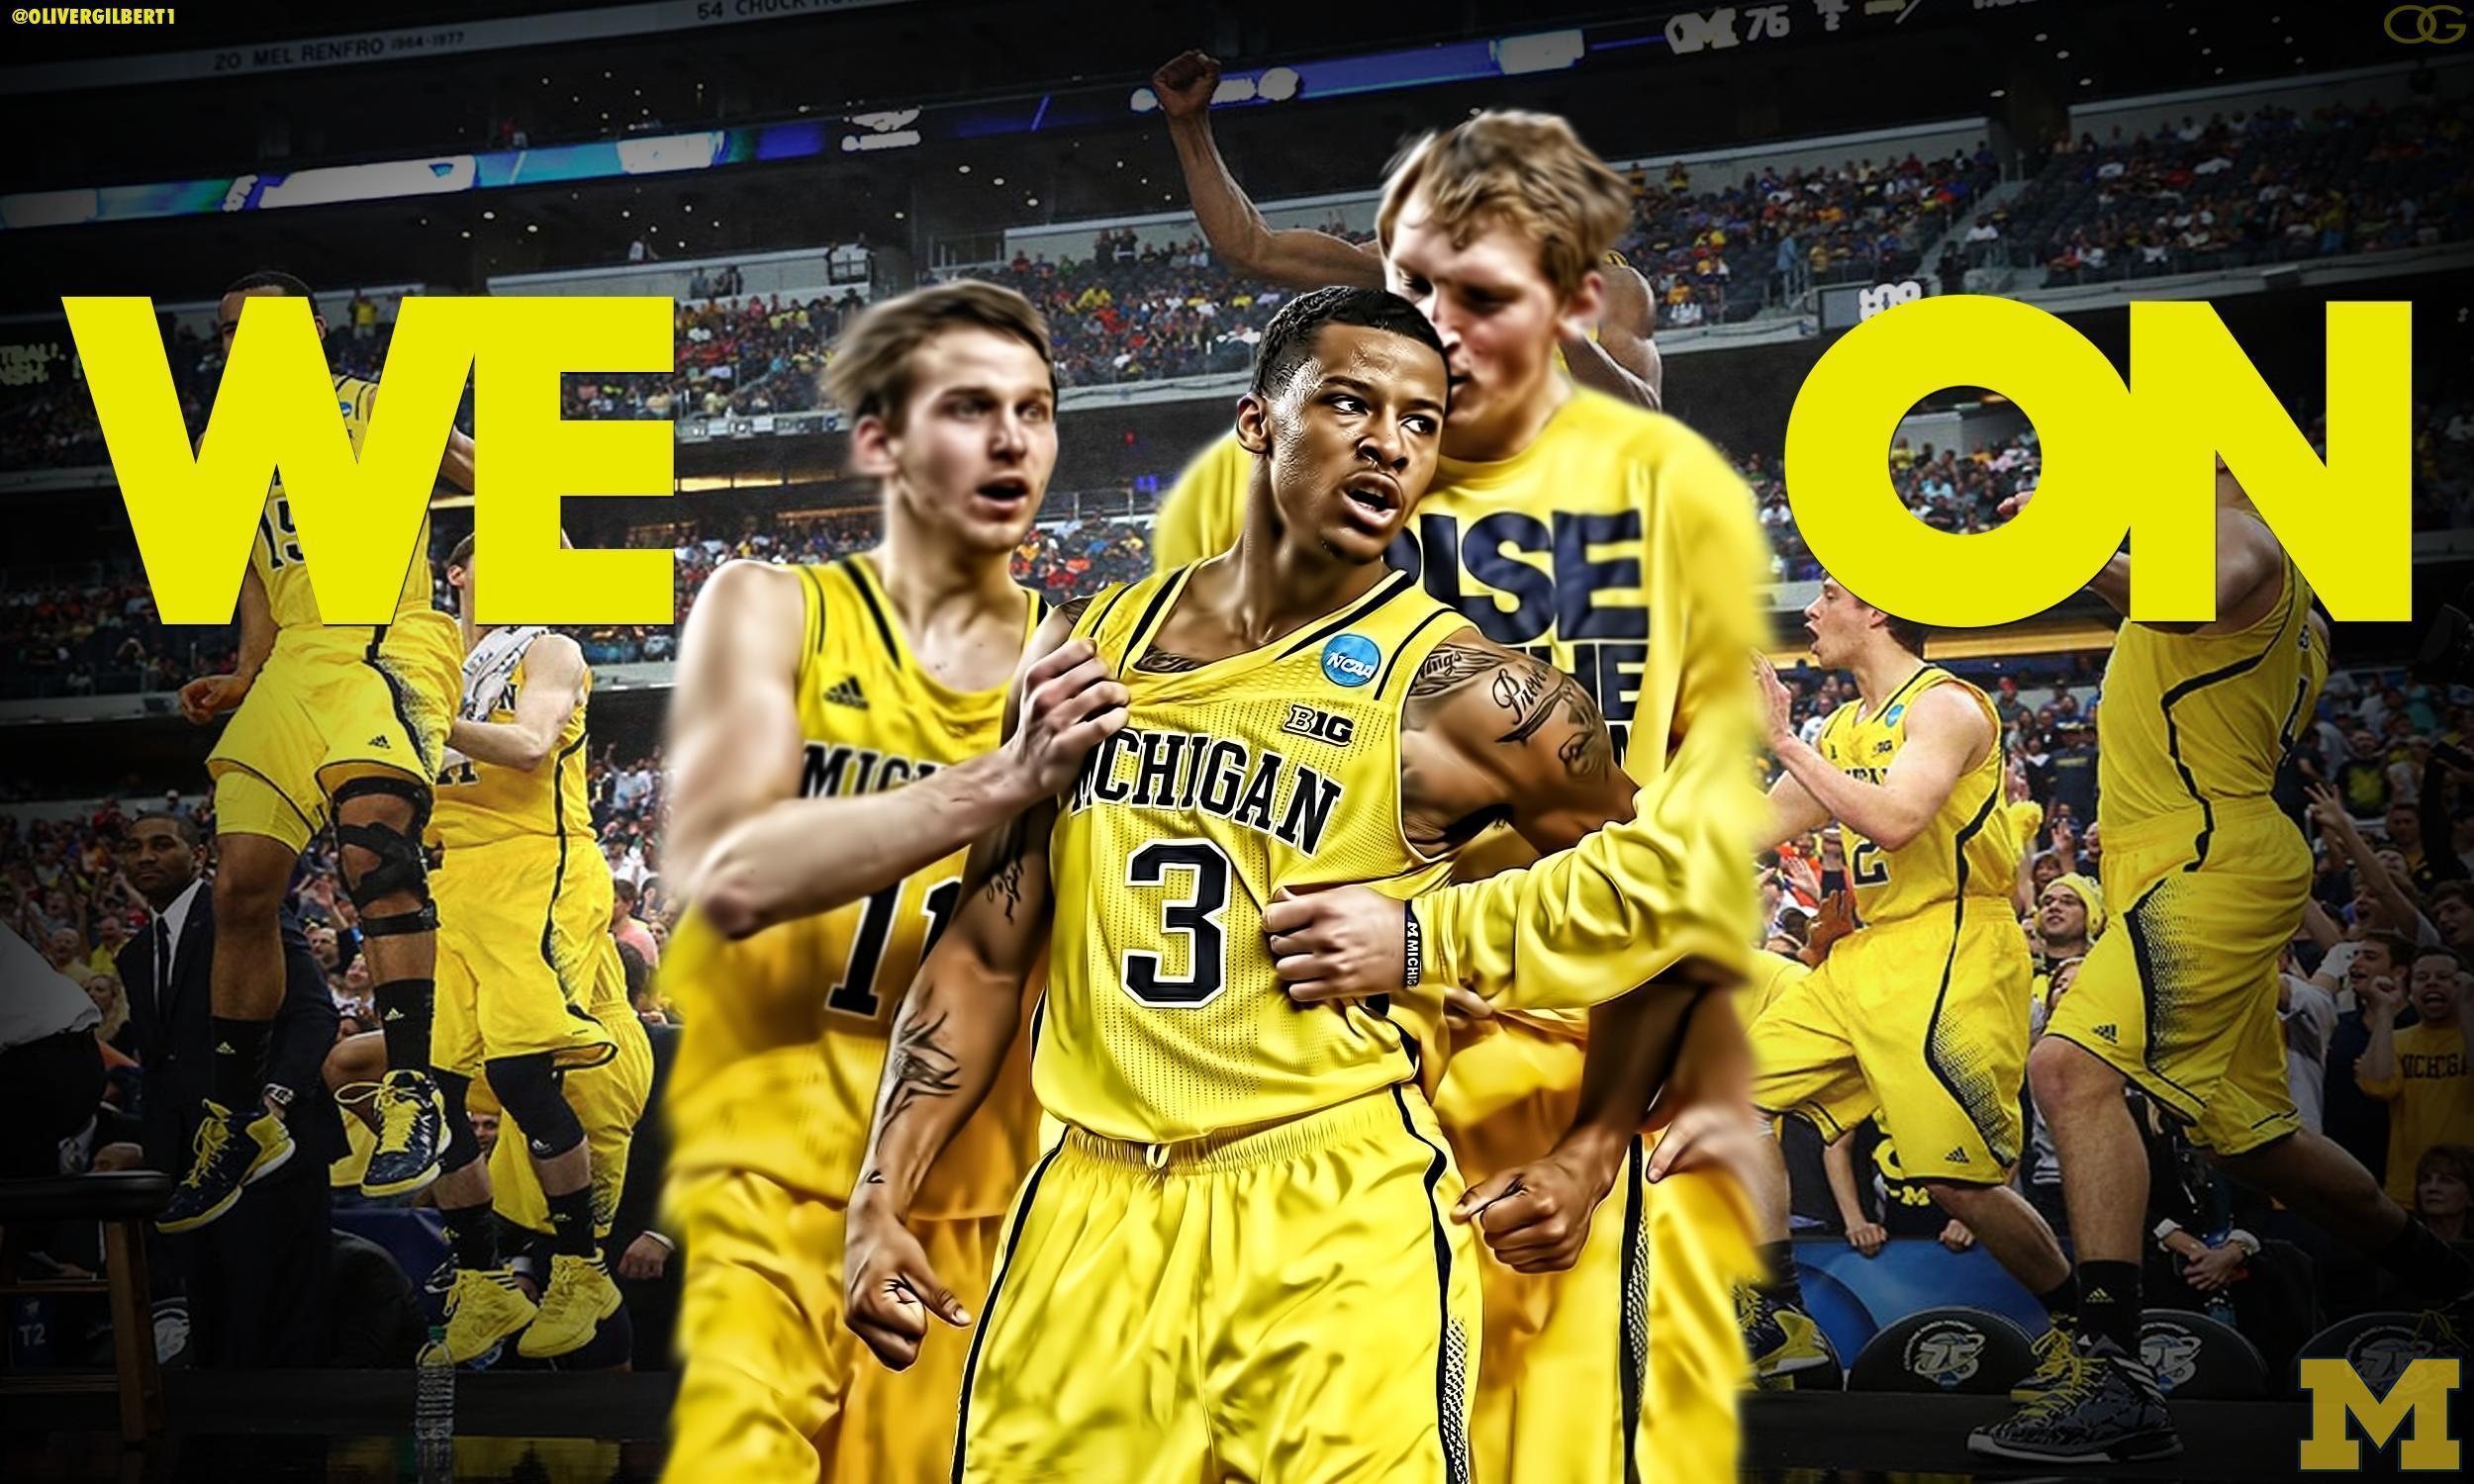 College Basketball Wallpapers - Wallpaper Cave2500 x 1500